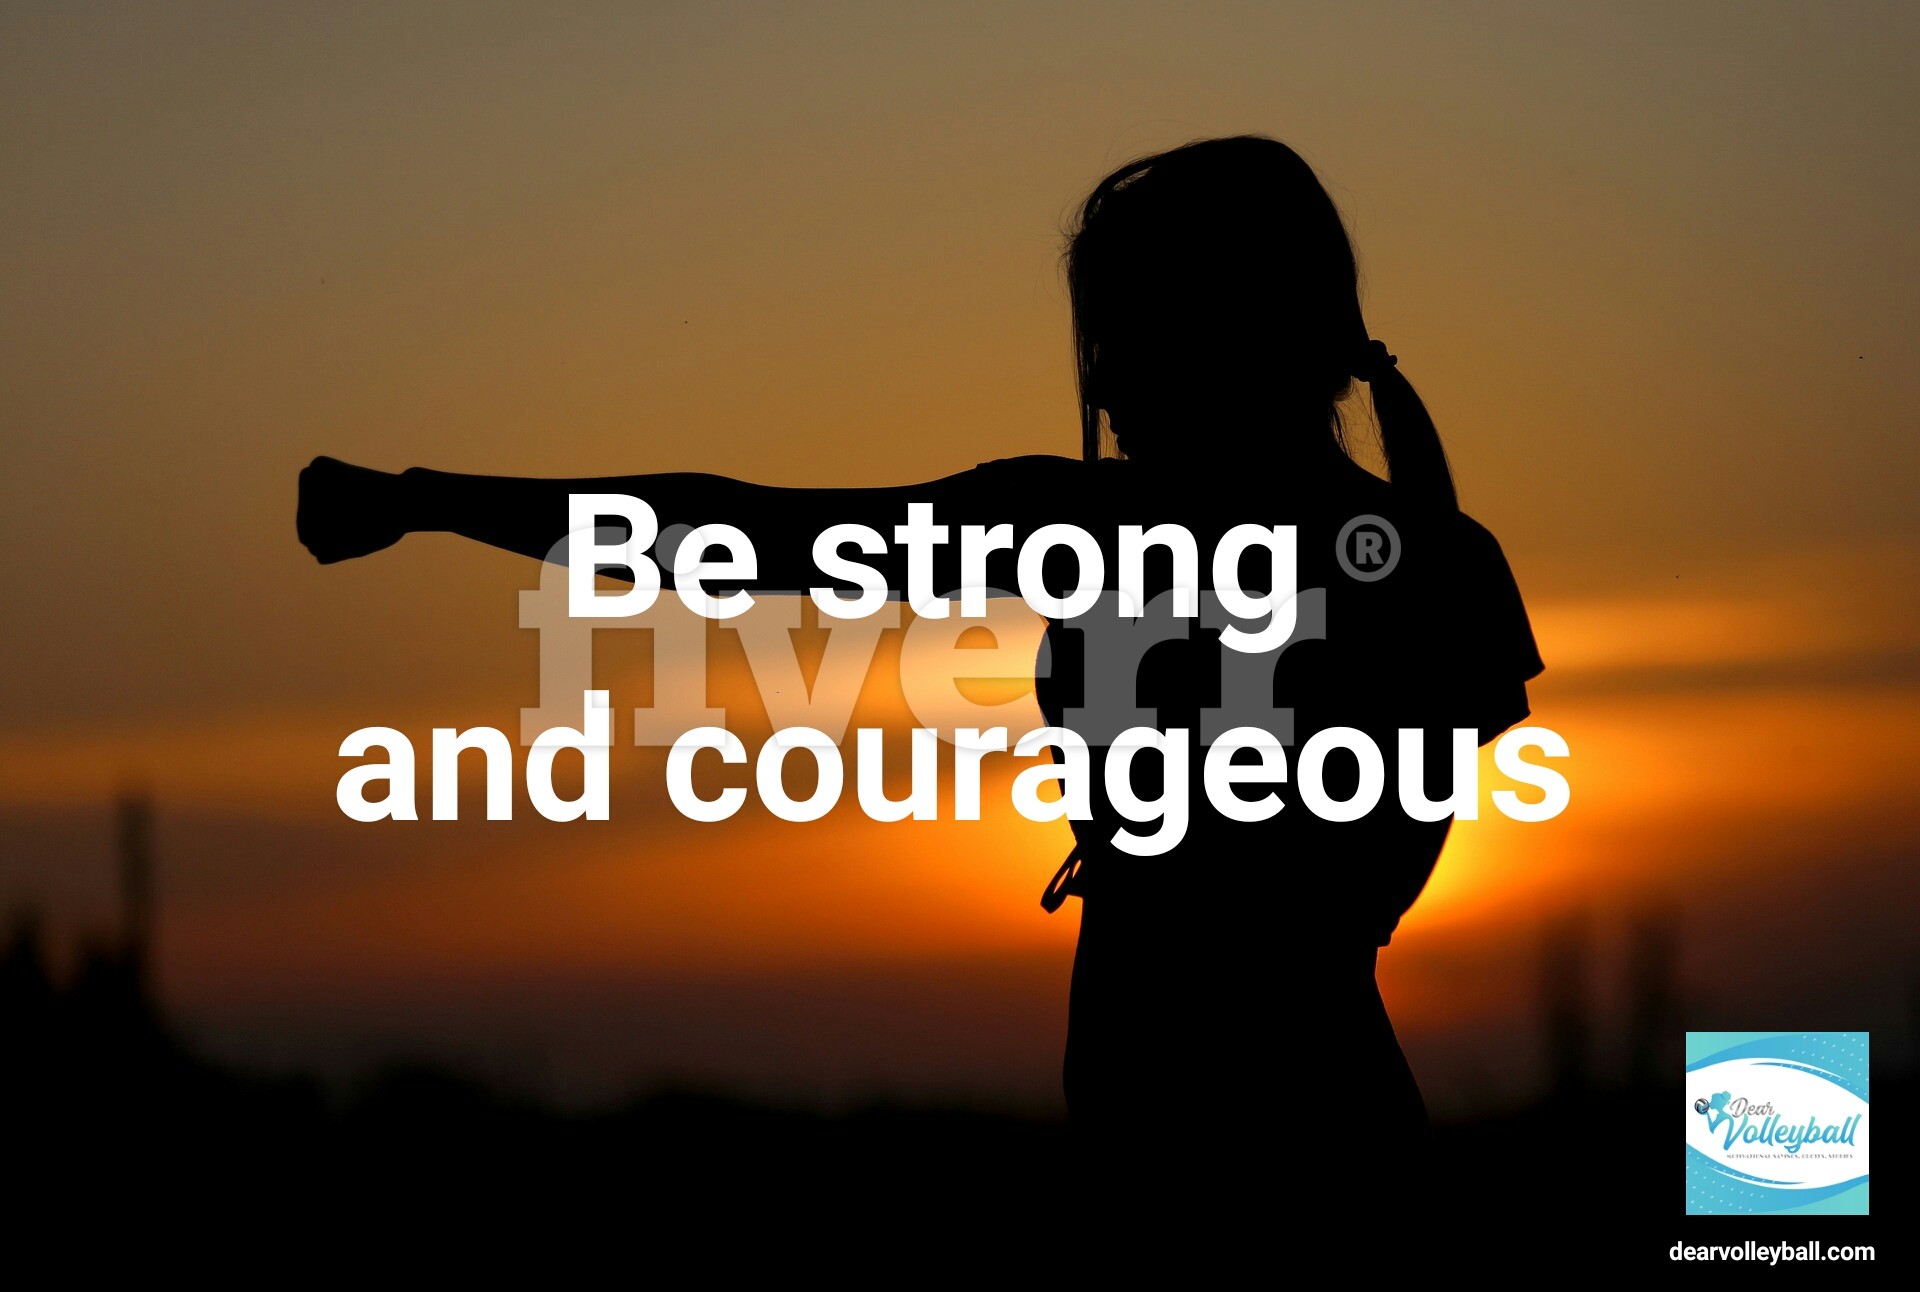 Be strong and courageous and 54 short inspirational quotes on DearVolleyball.com